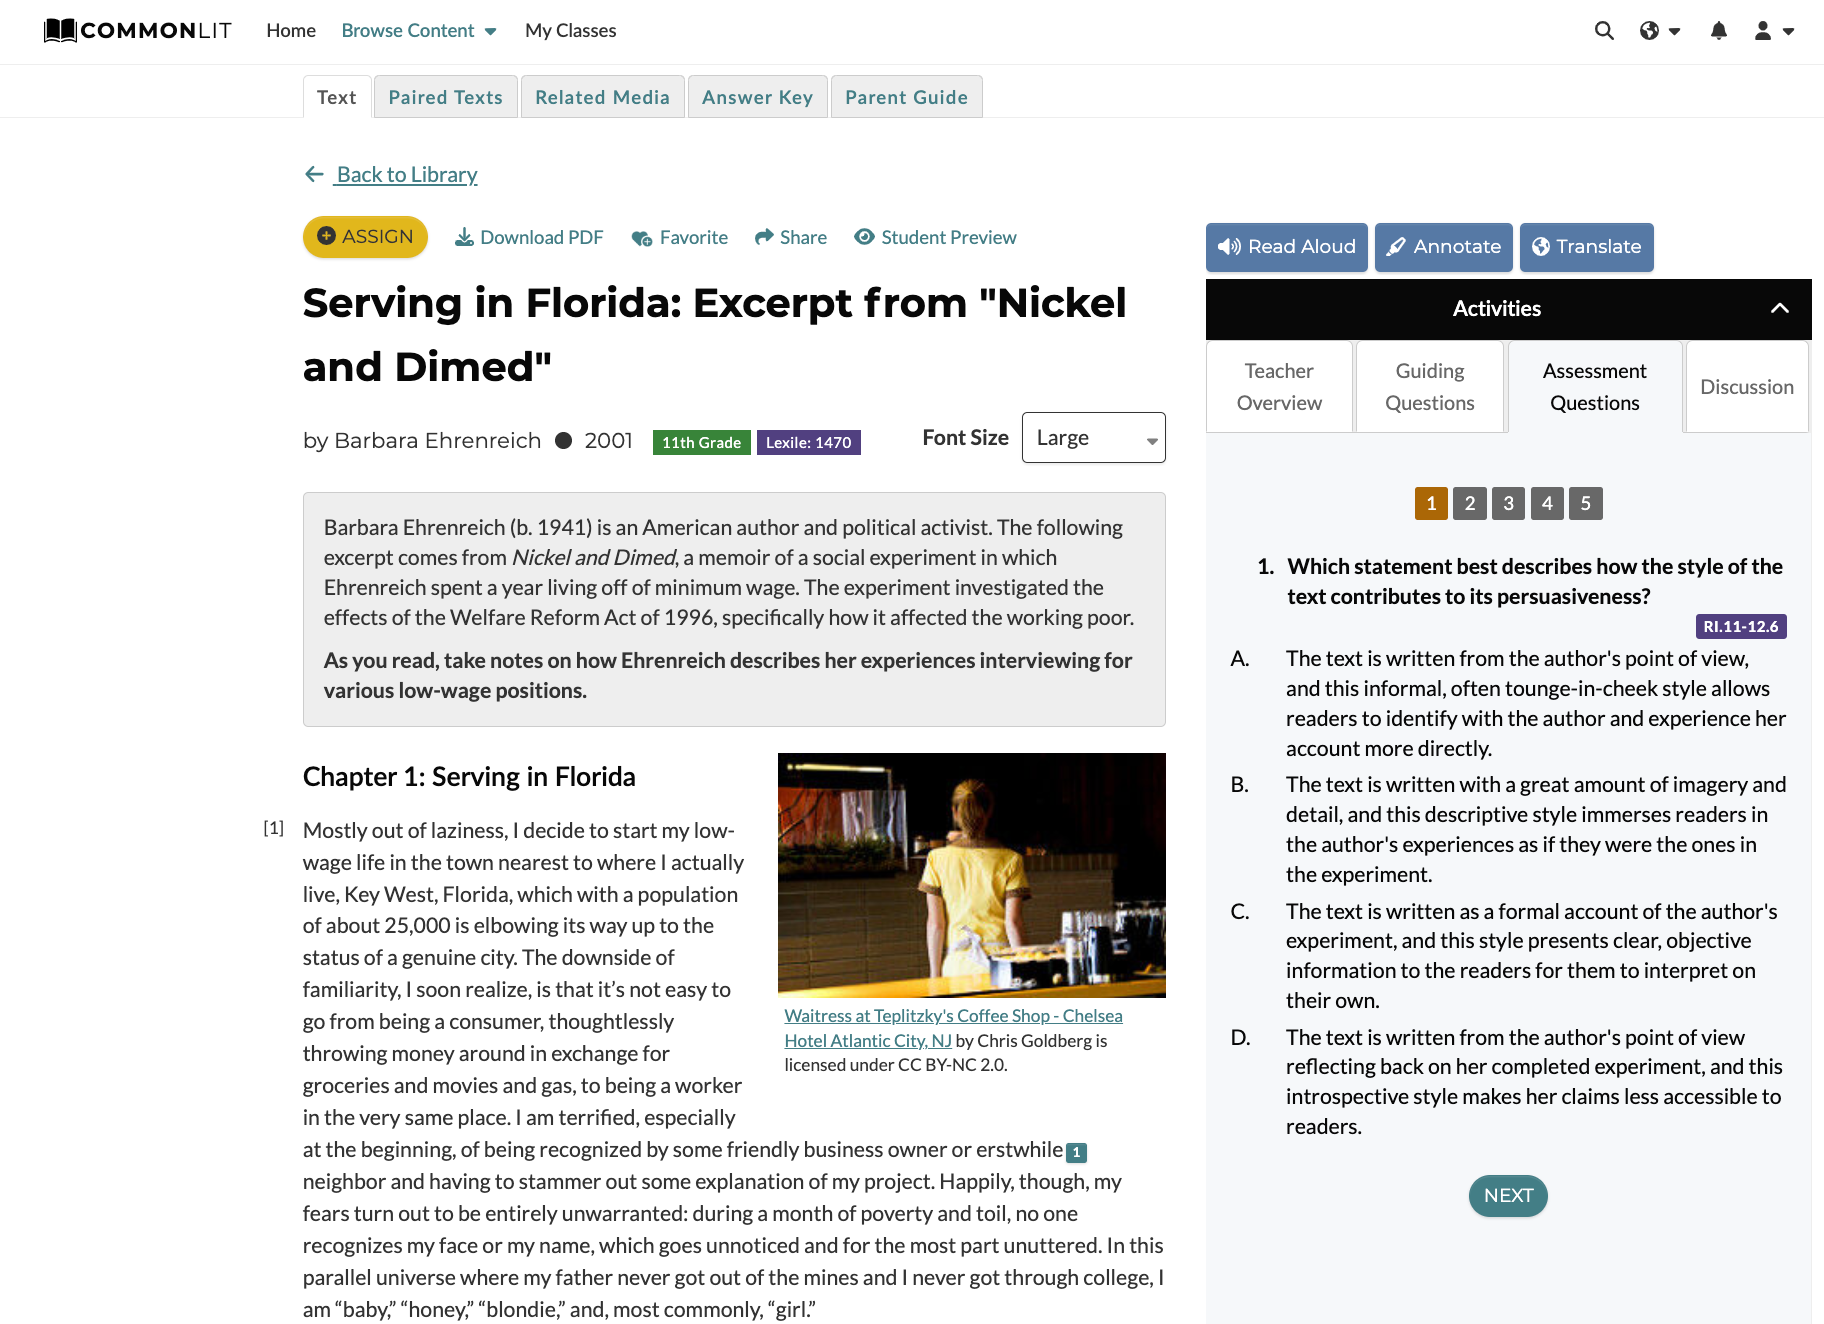 Screenshot of a memoir example for students from the CommonLit library called “Serving in Florida: Excerpt from ‘Nickel and Dimed.’” On the right side there is an assessment question, which is designed to improve high schoolers' reading comprehension.